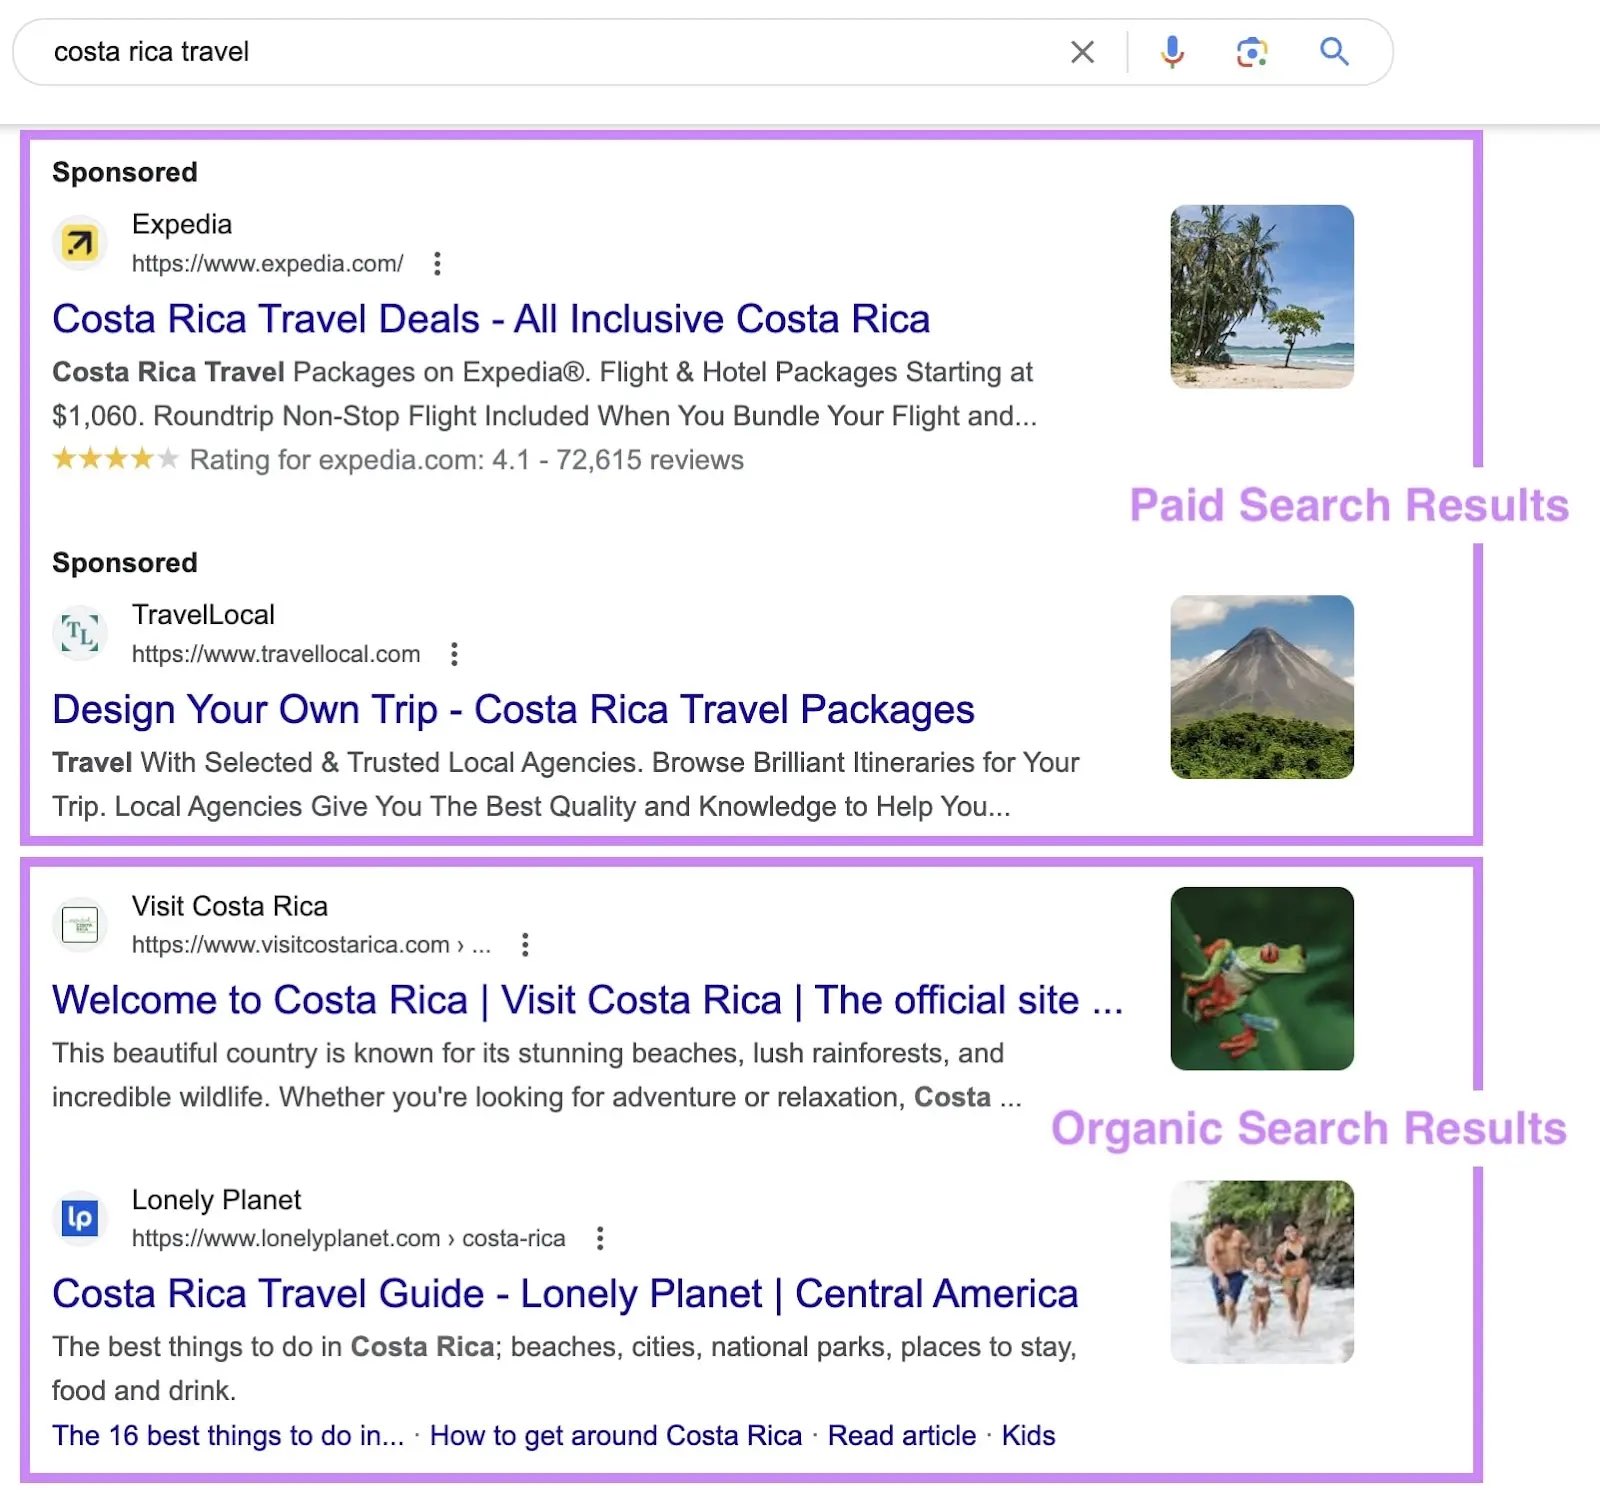 Google SERP for "costa rica travel" with paid search results marked at the top, and organic search results below